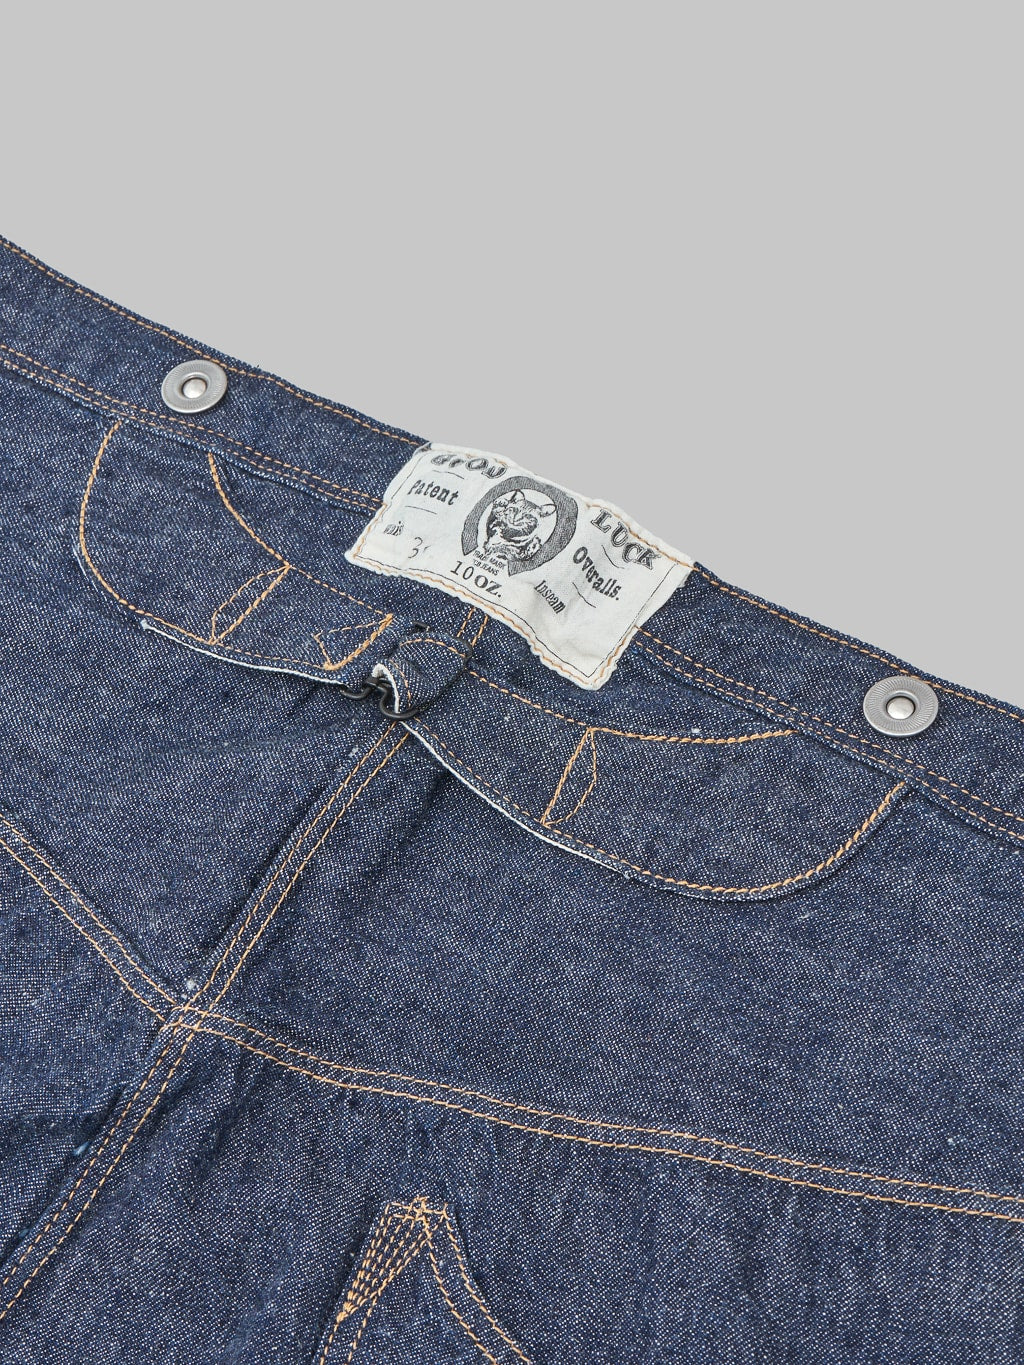 TCB Good Luck Wide Straight Jeans back label